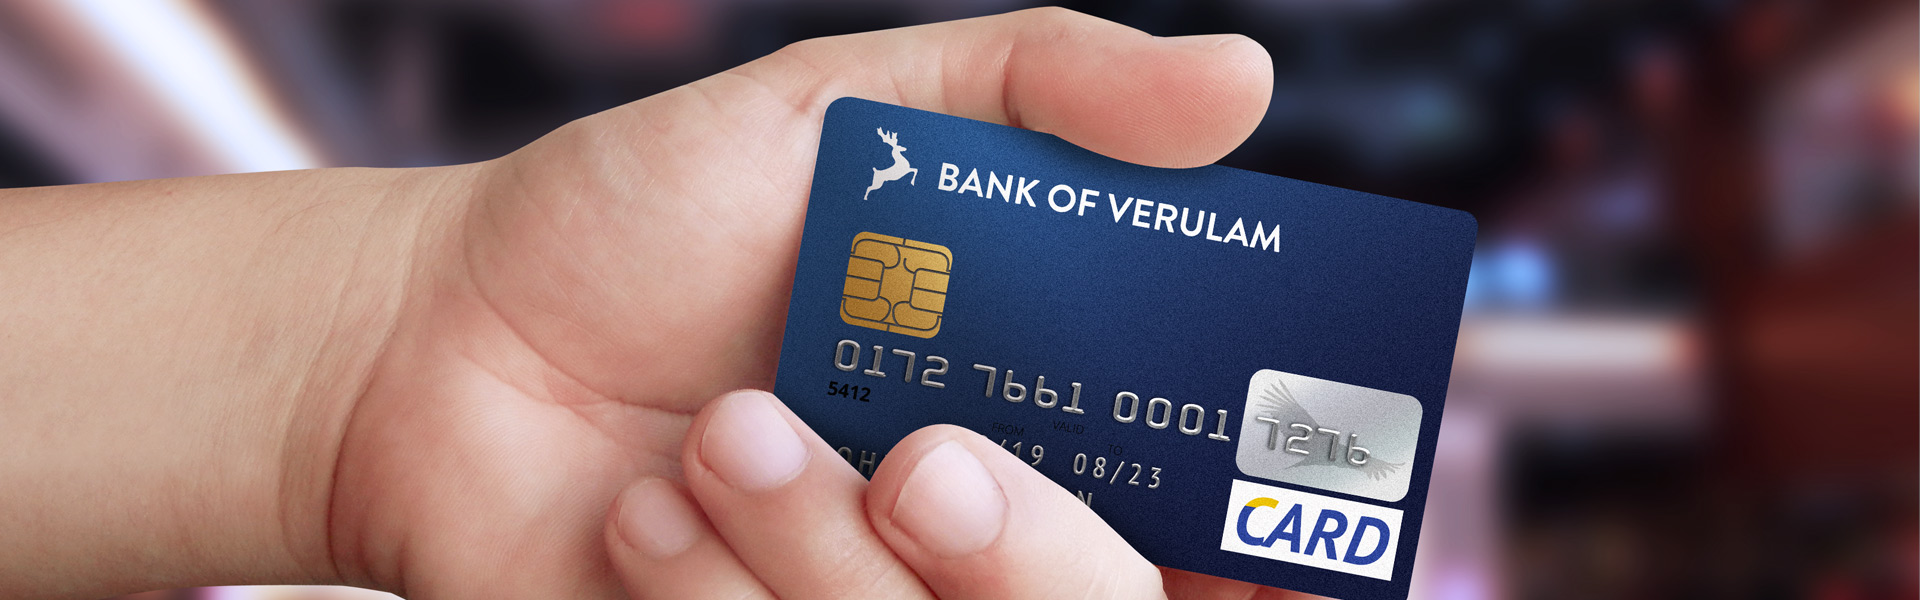 mockup of hand holding bank card. card is in school colours and reads: bank of verulam.